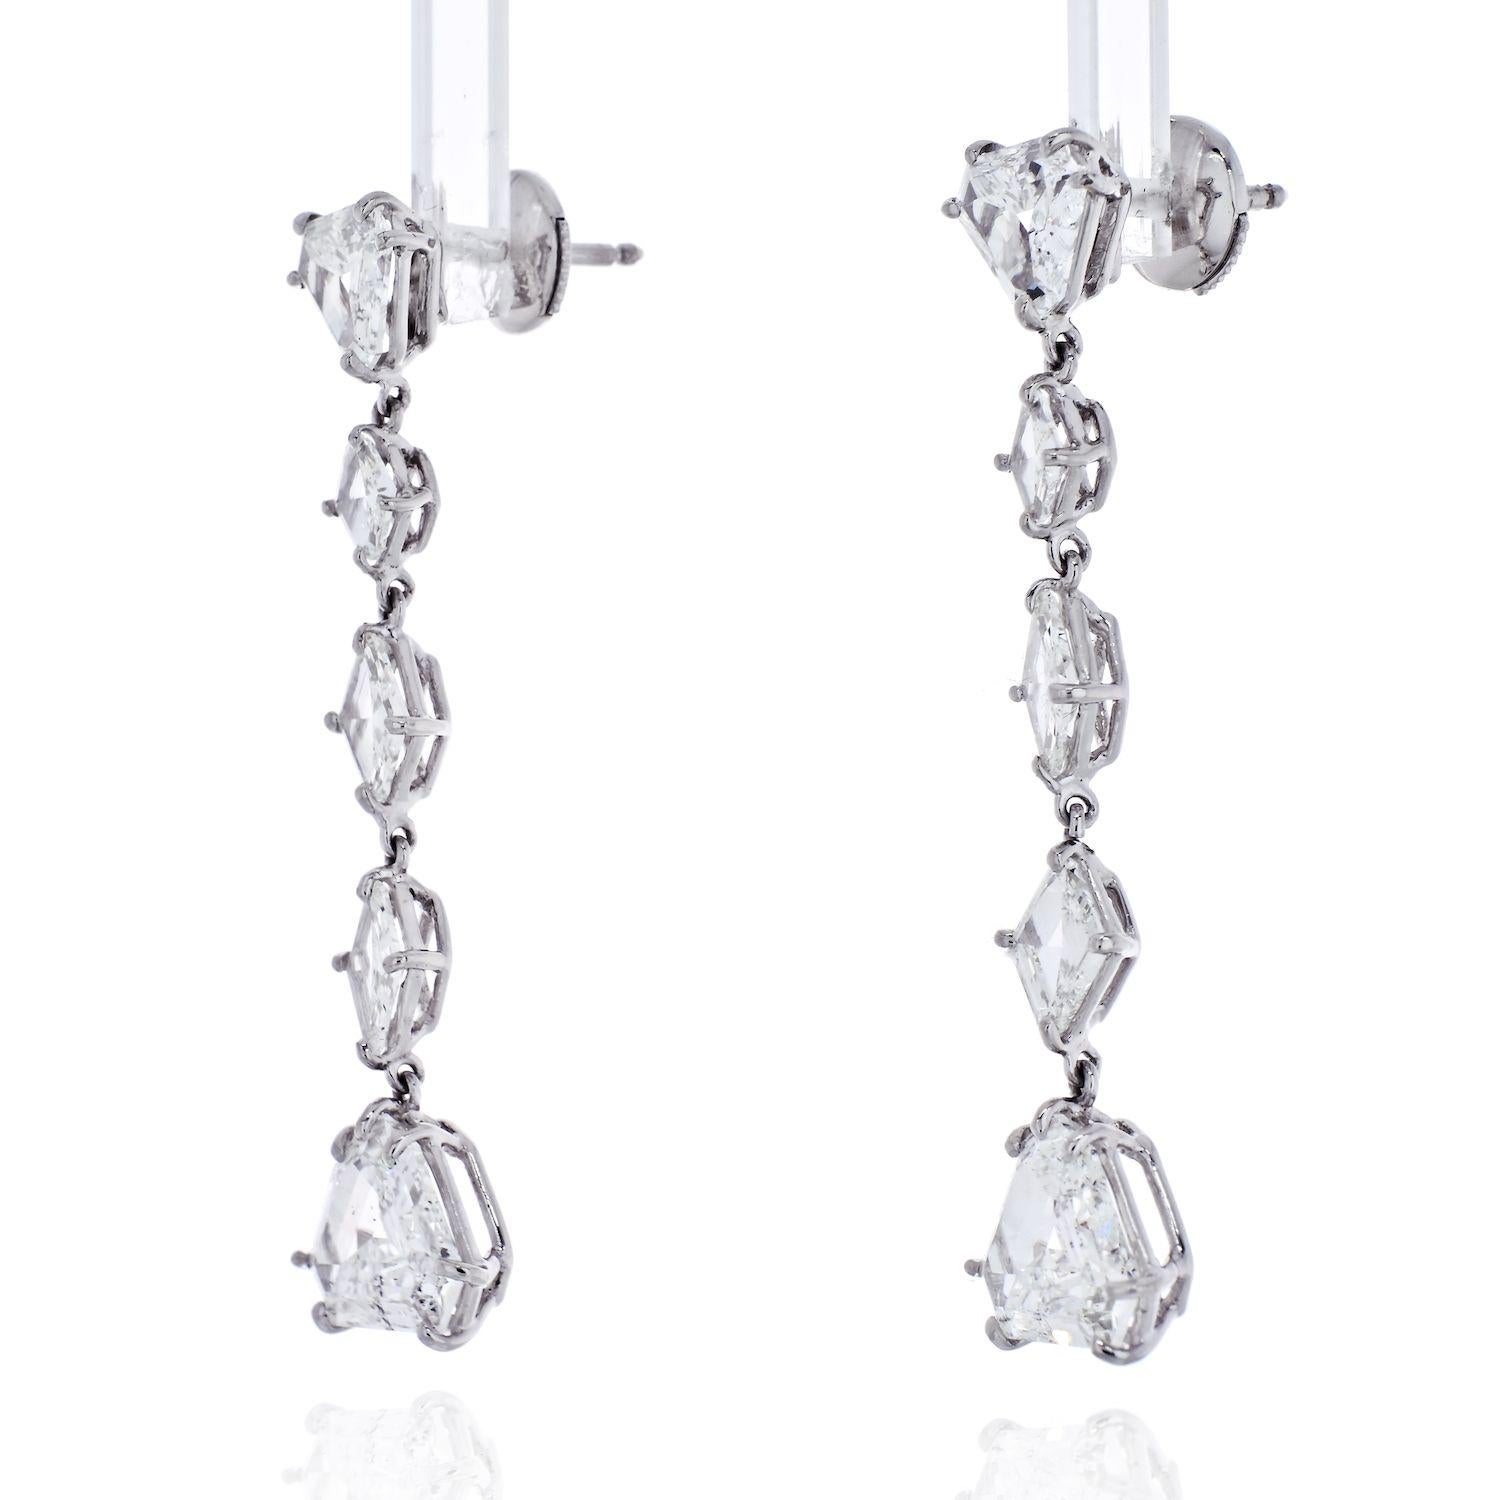 Platinum 7 Carat Fine Stone Dangling Diamond Earrings

Crafted in platinum these dangling earrings are manufactured with shield and kite-cut diamonds. 

Each earring contains 5 diamonds of about 3.50cttw. The total pair carat weight is about 7